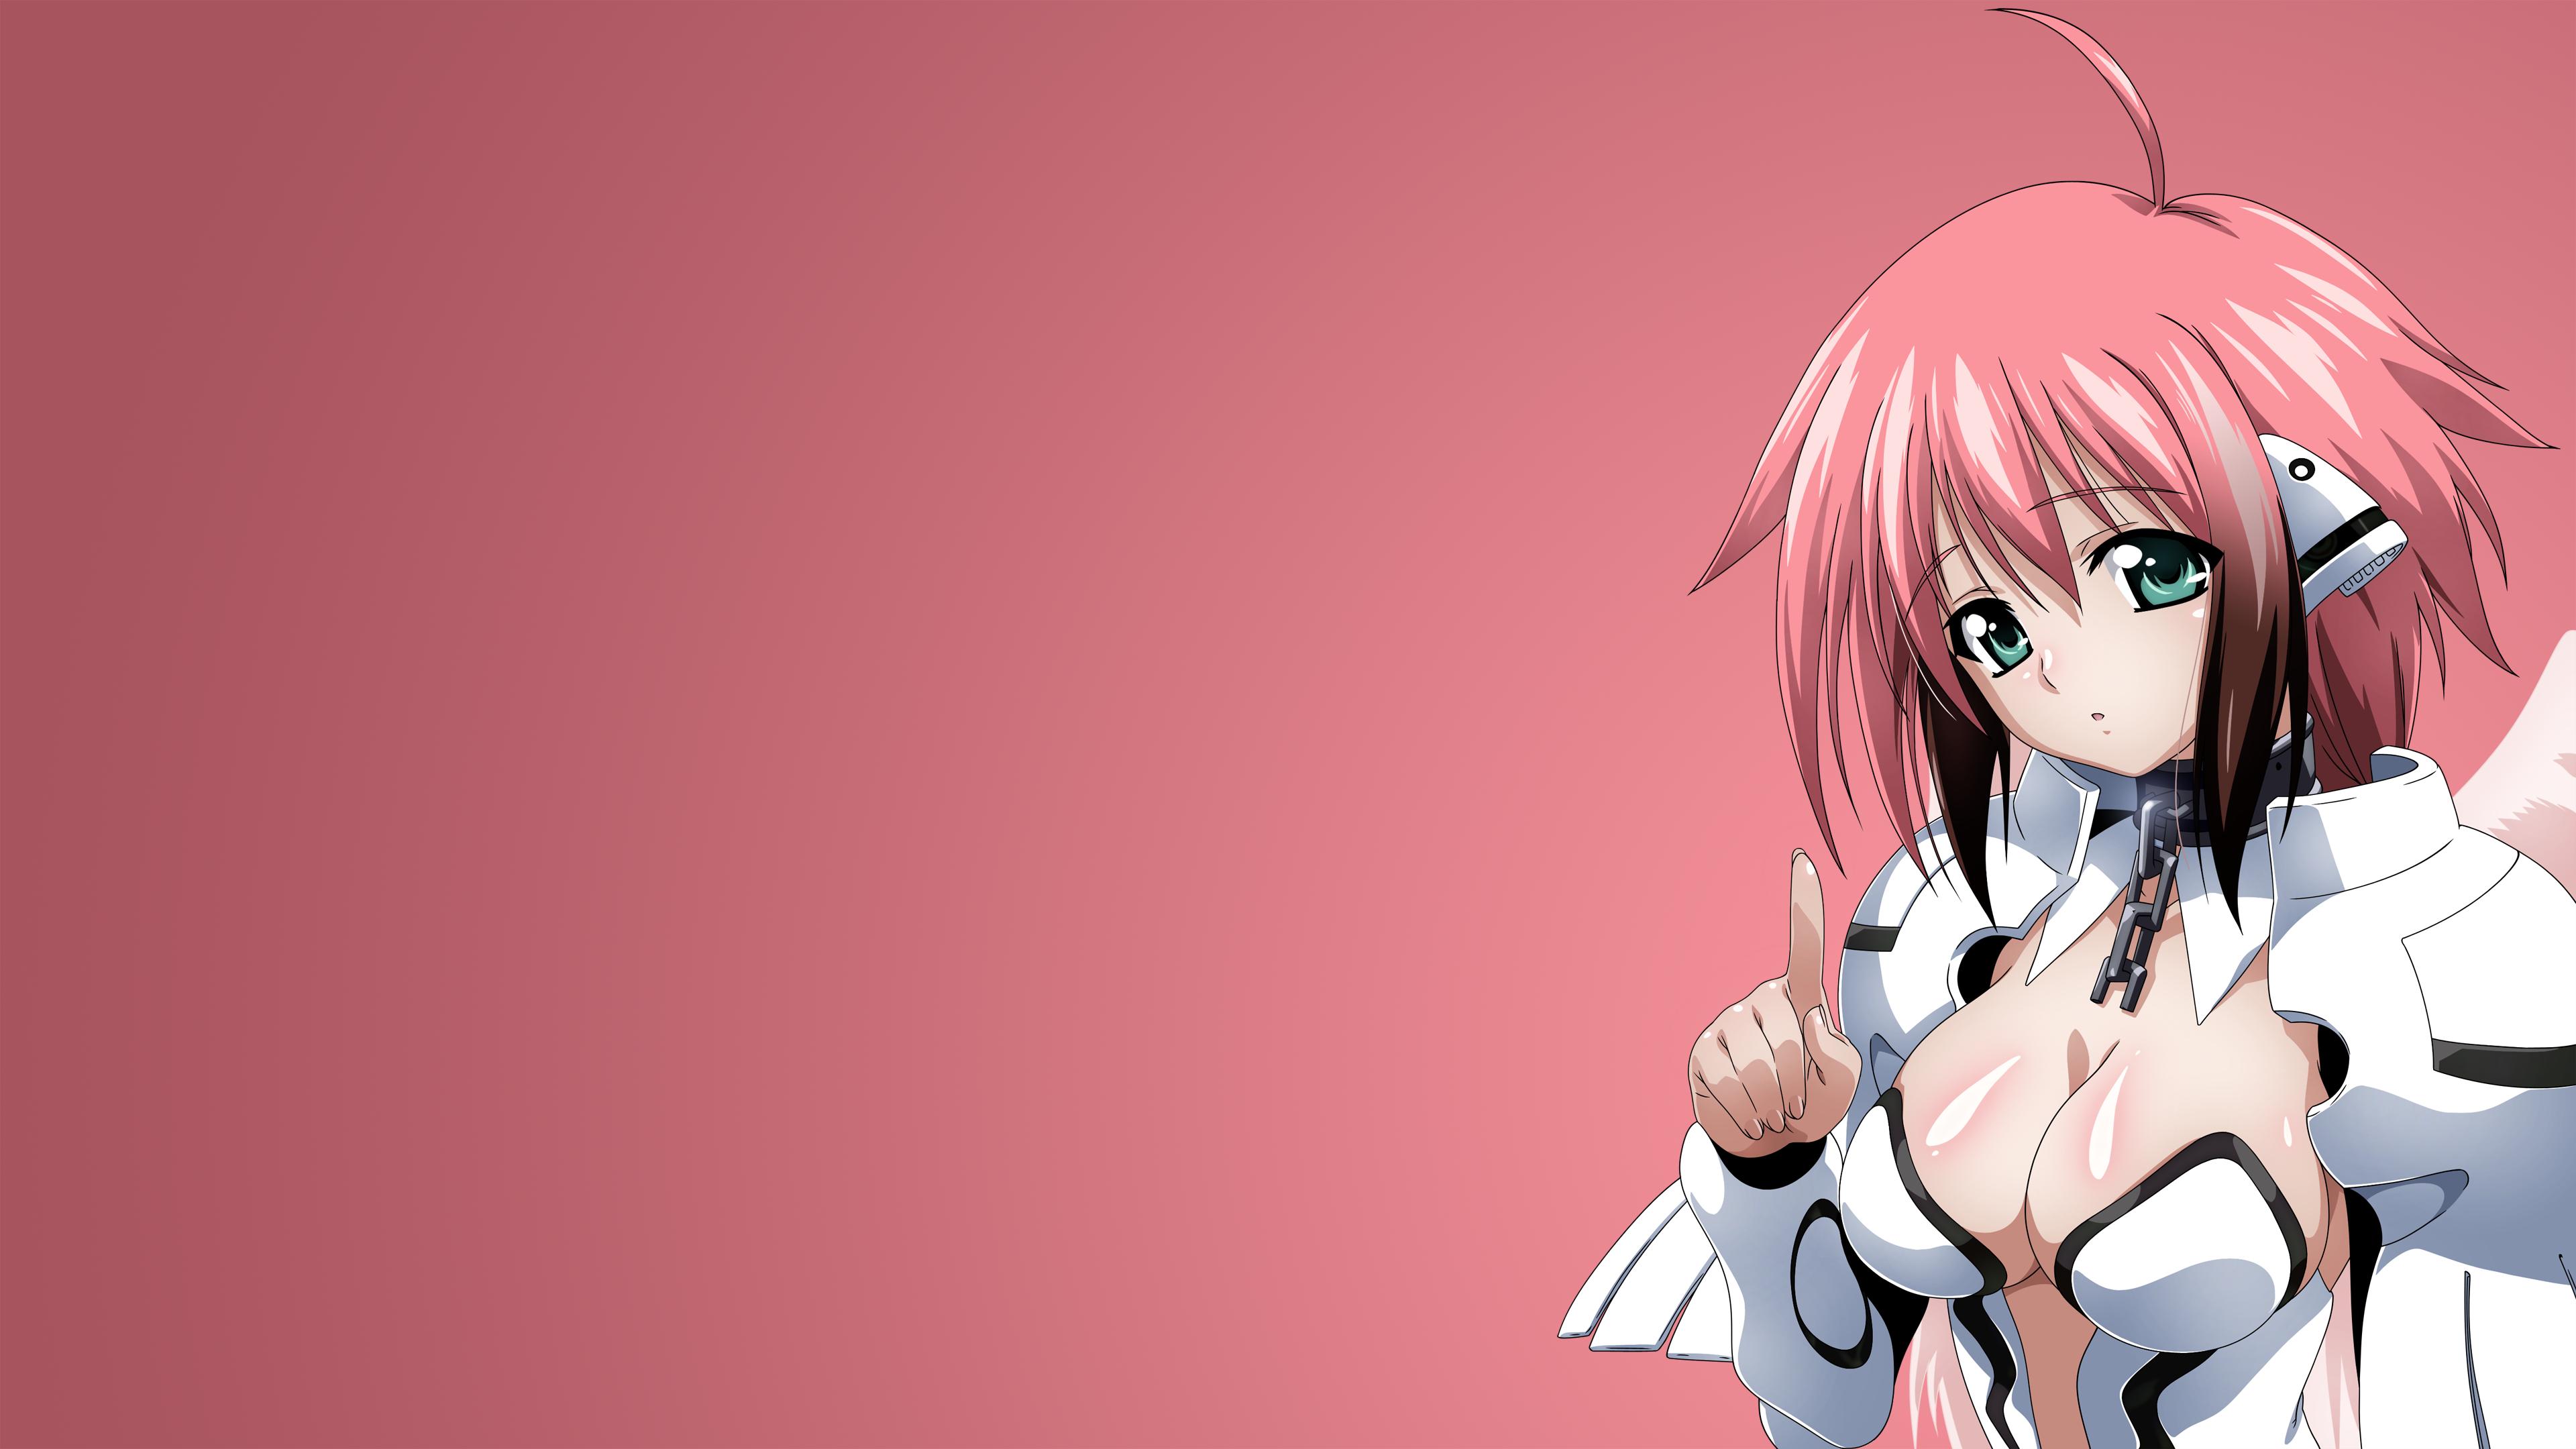 [Heavens Lost Property]3840x2160 HQ Backgrounds HD wallpapers